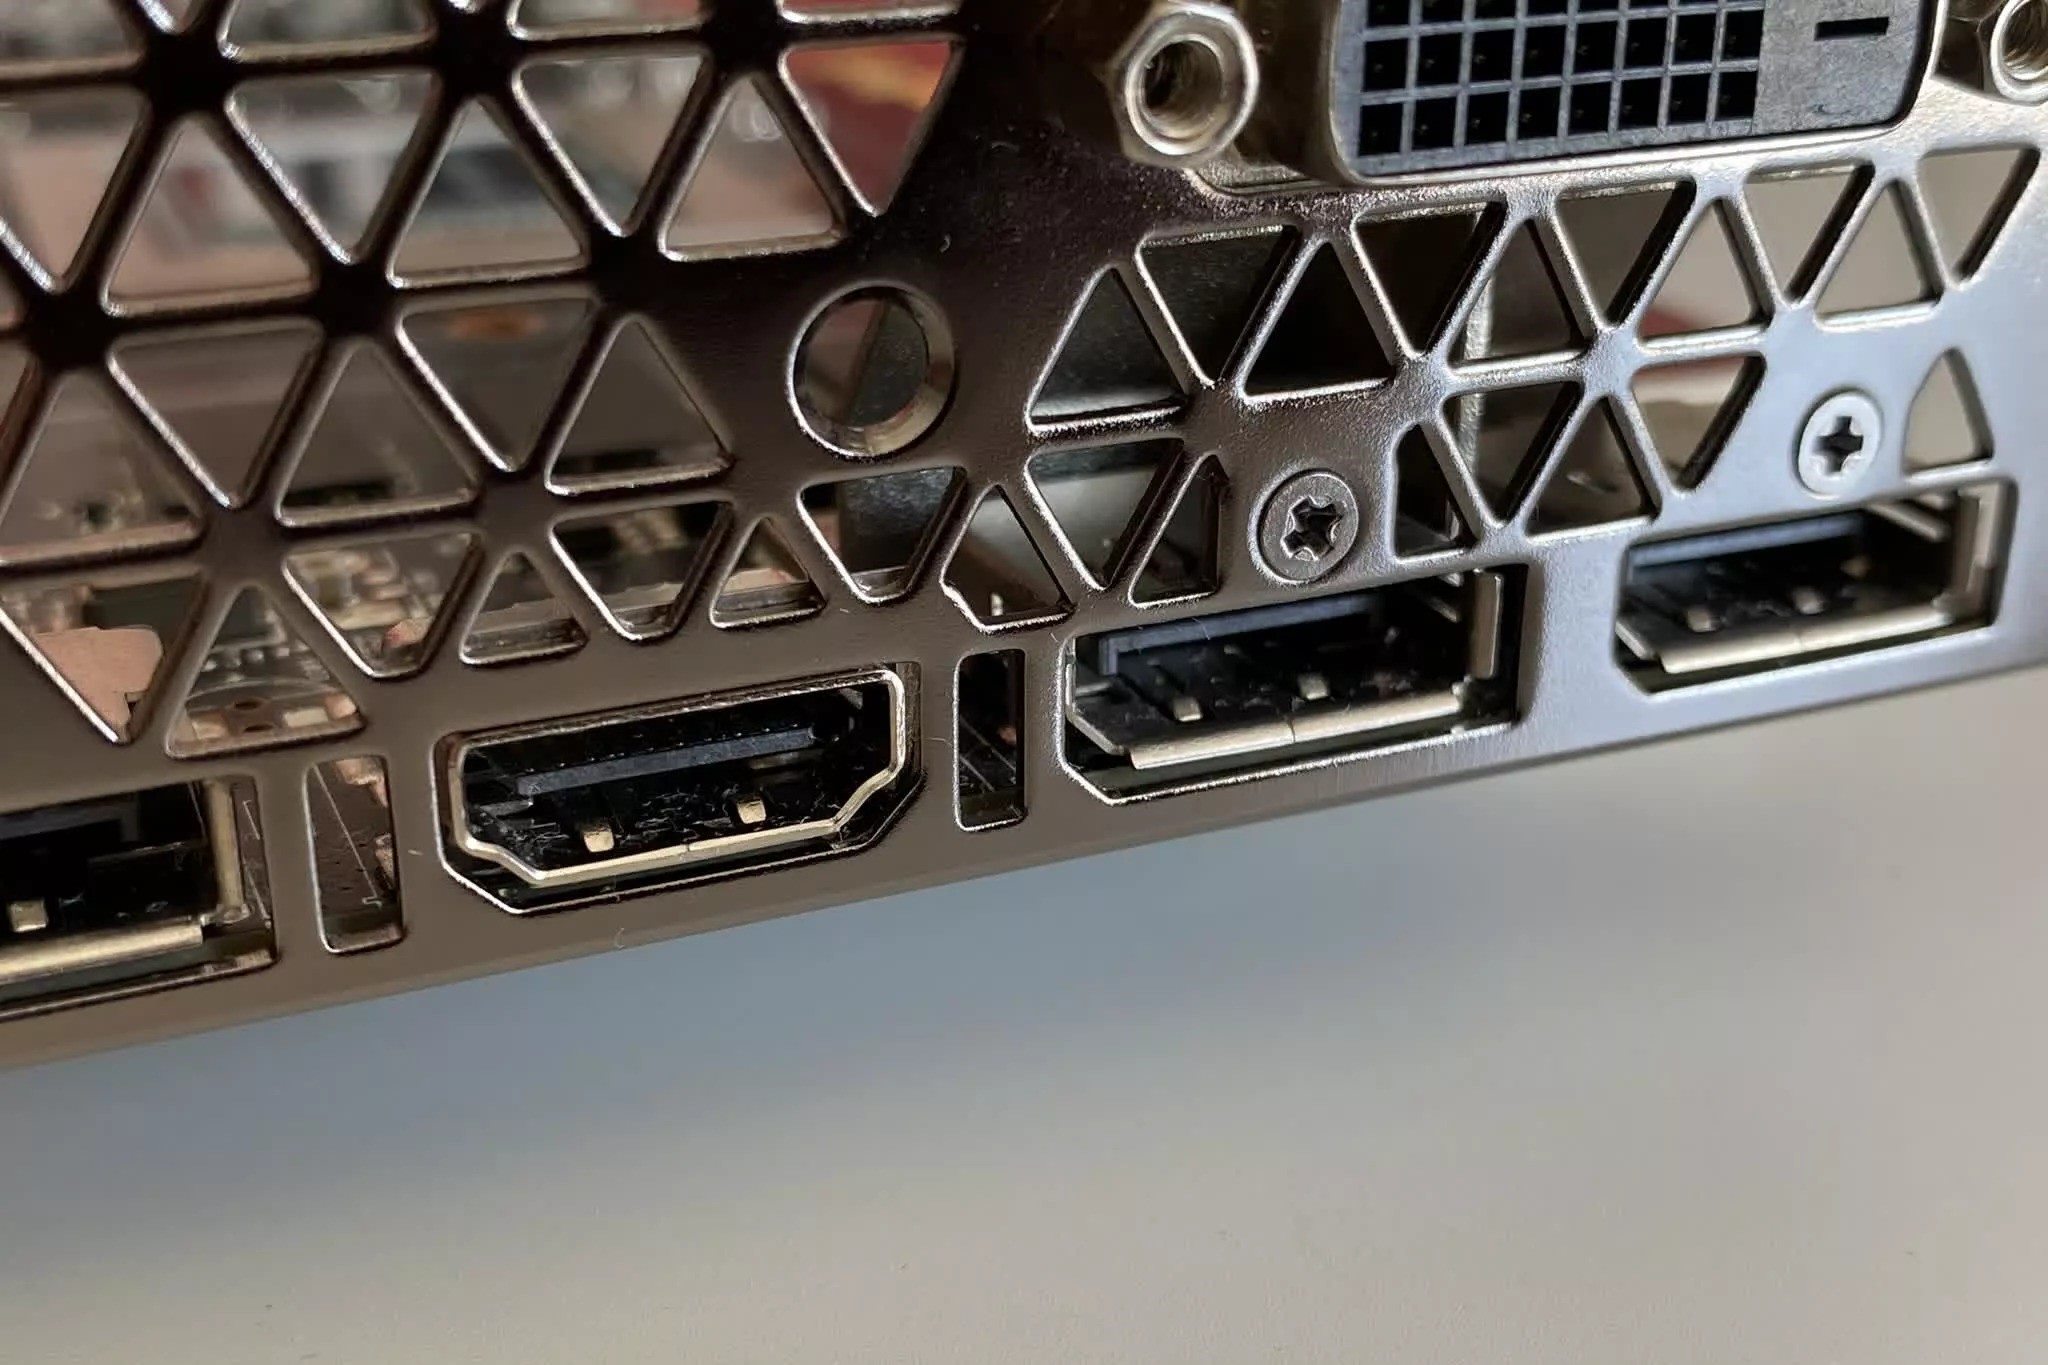 Understanding The DP Connector On A Video Card